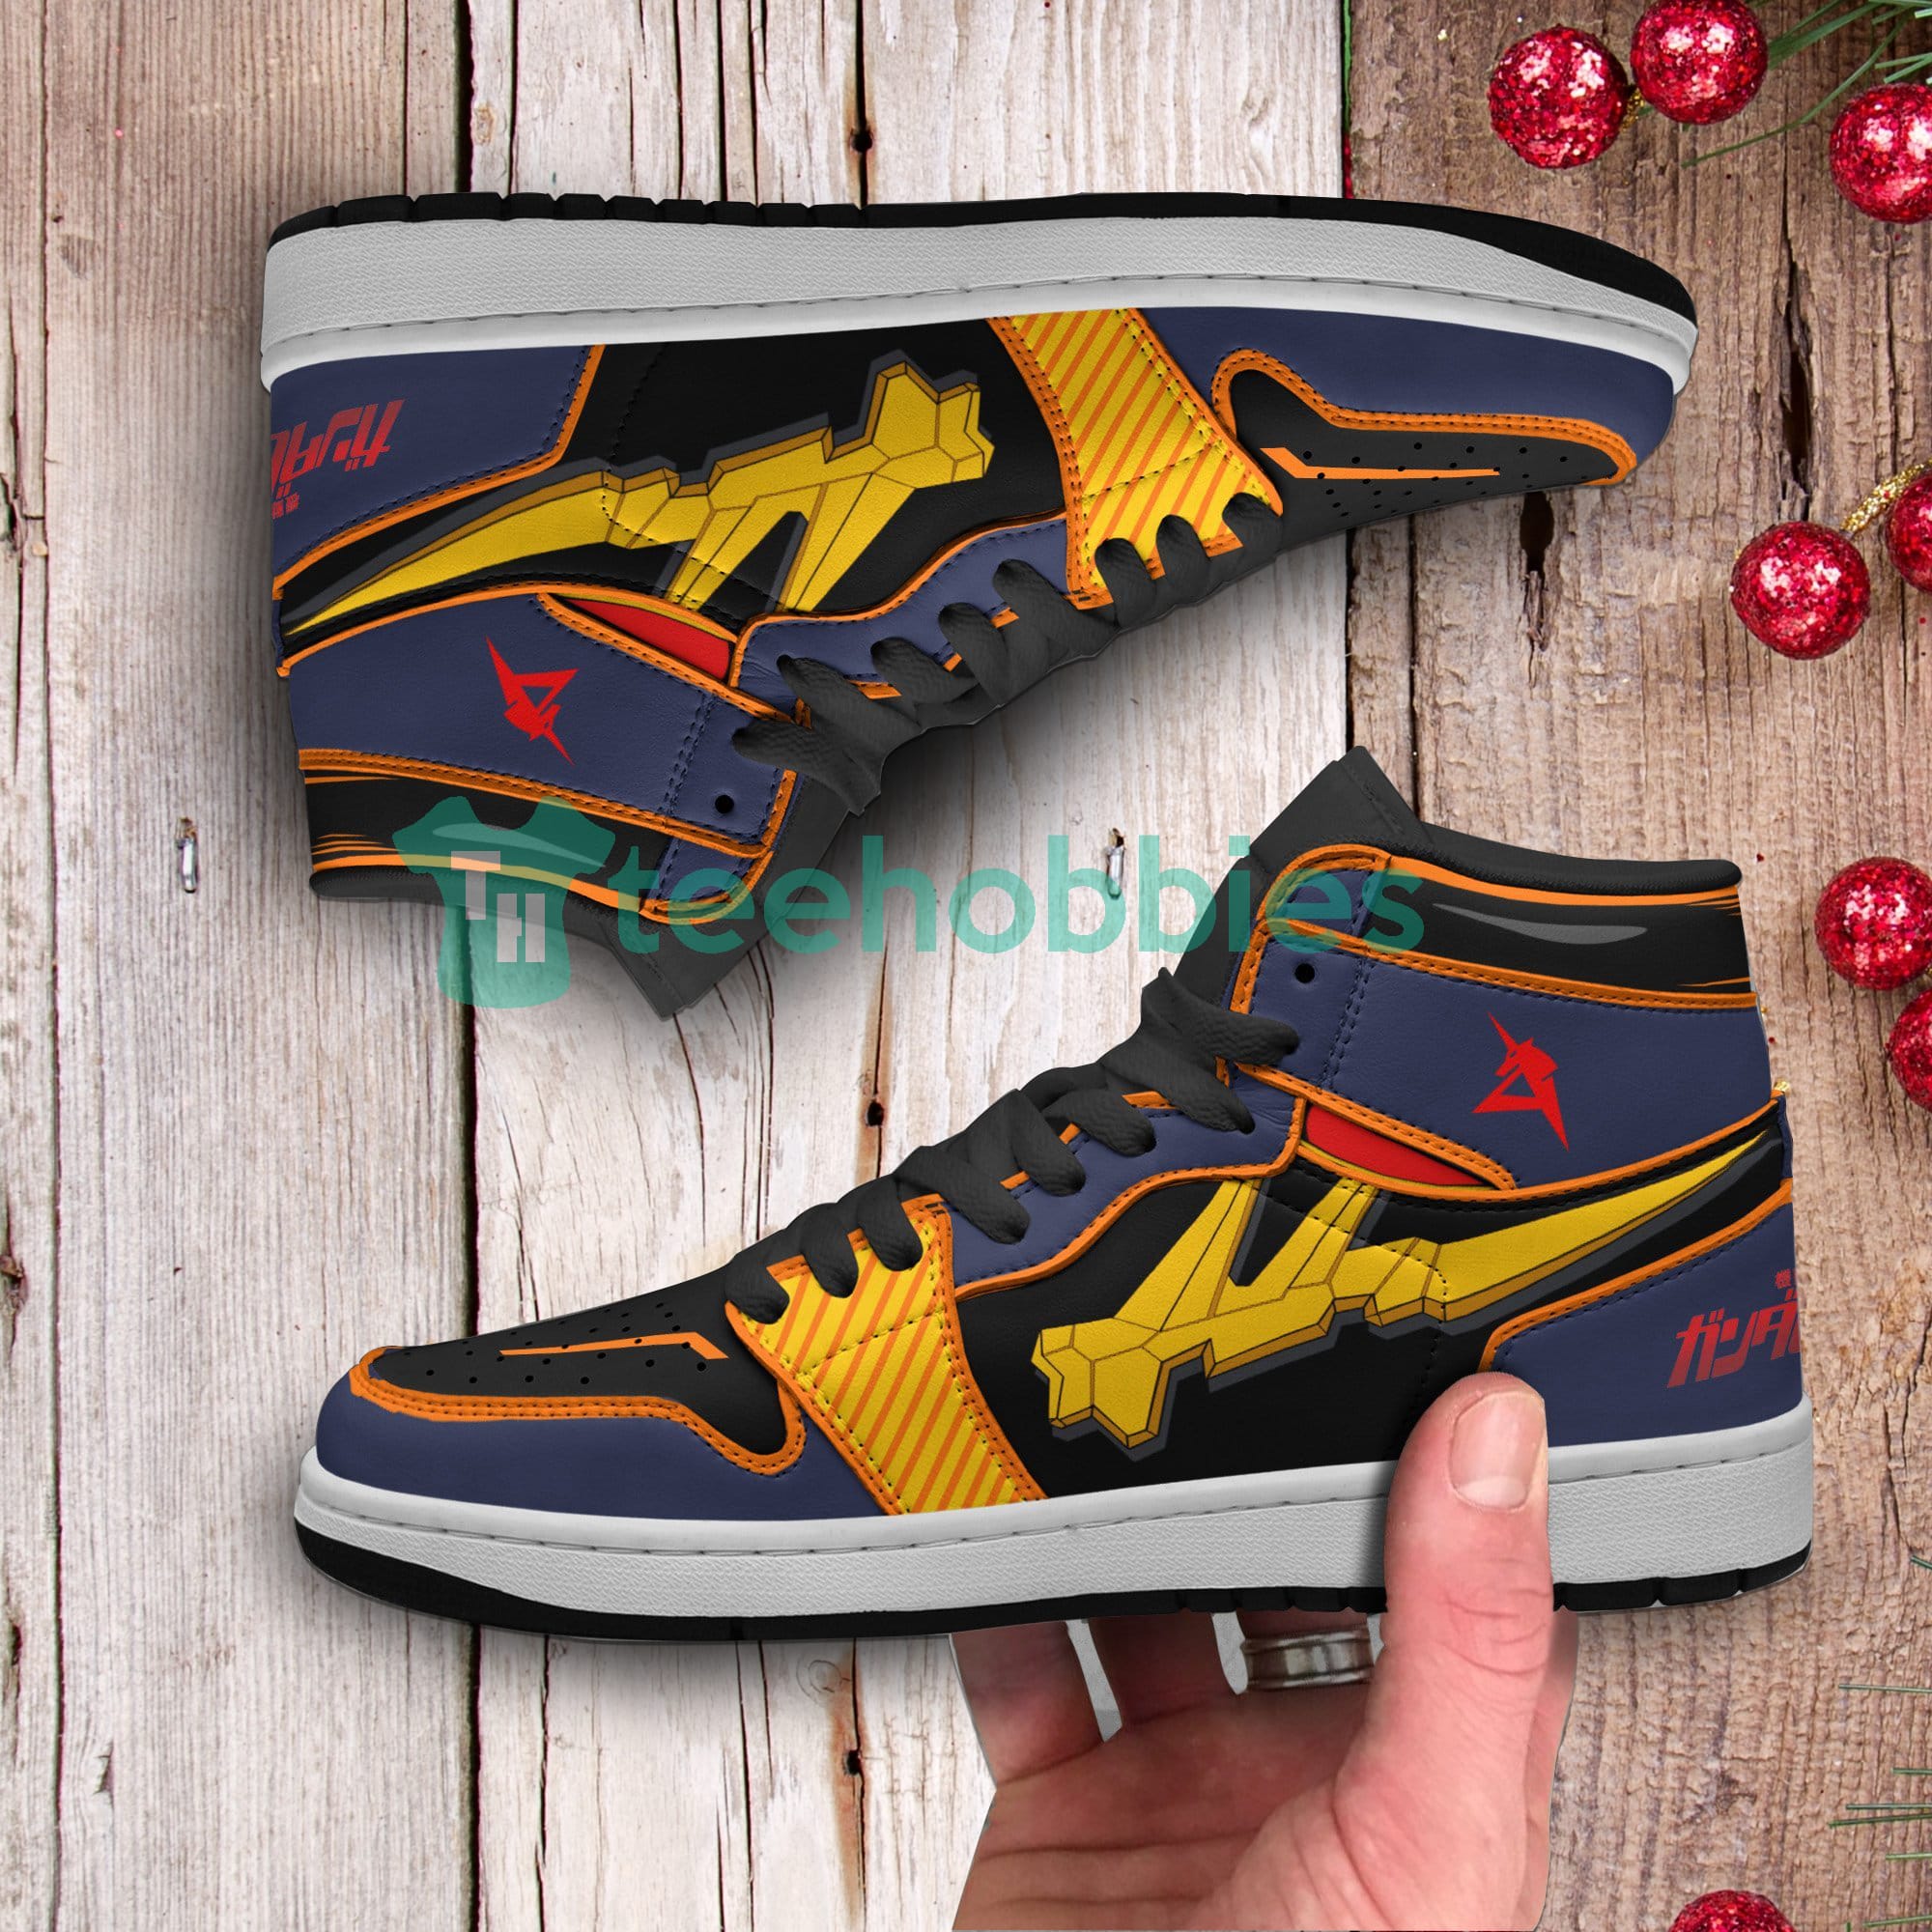 Anime-Themed High-Top Sneakers : banshee